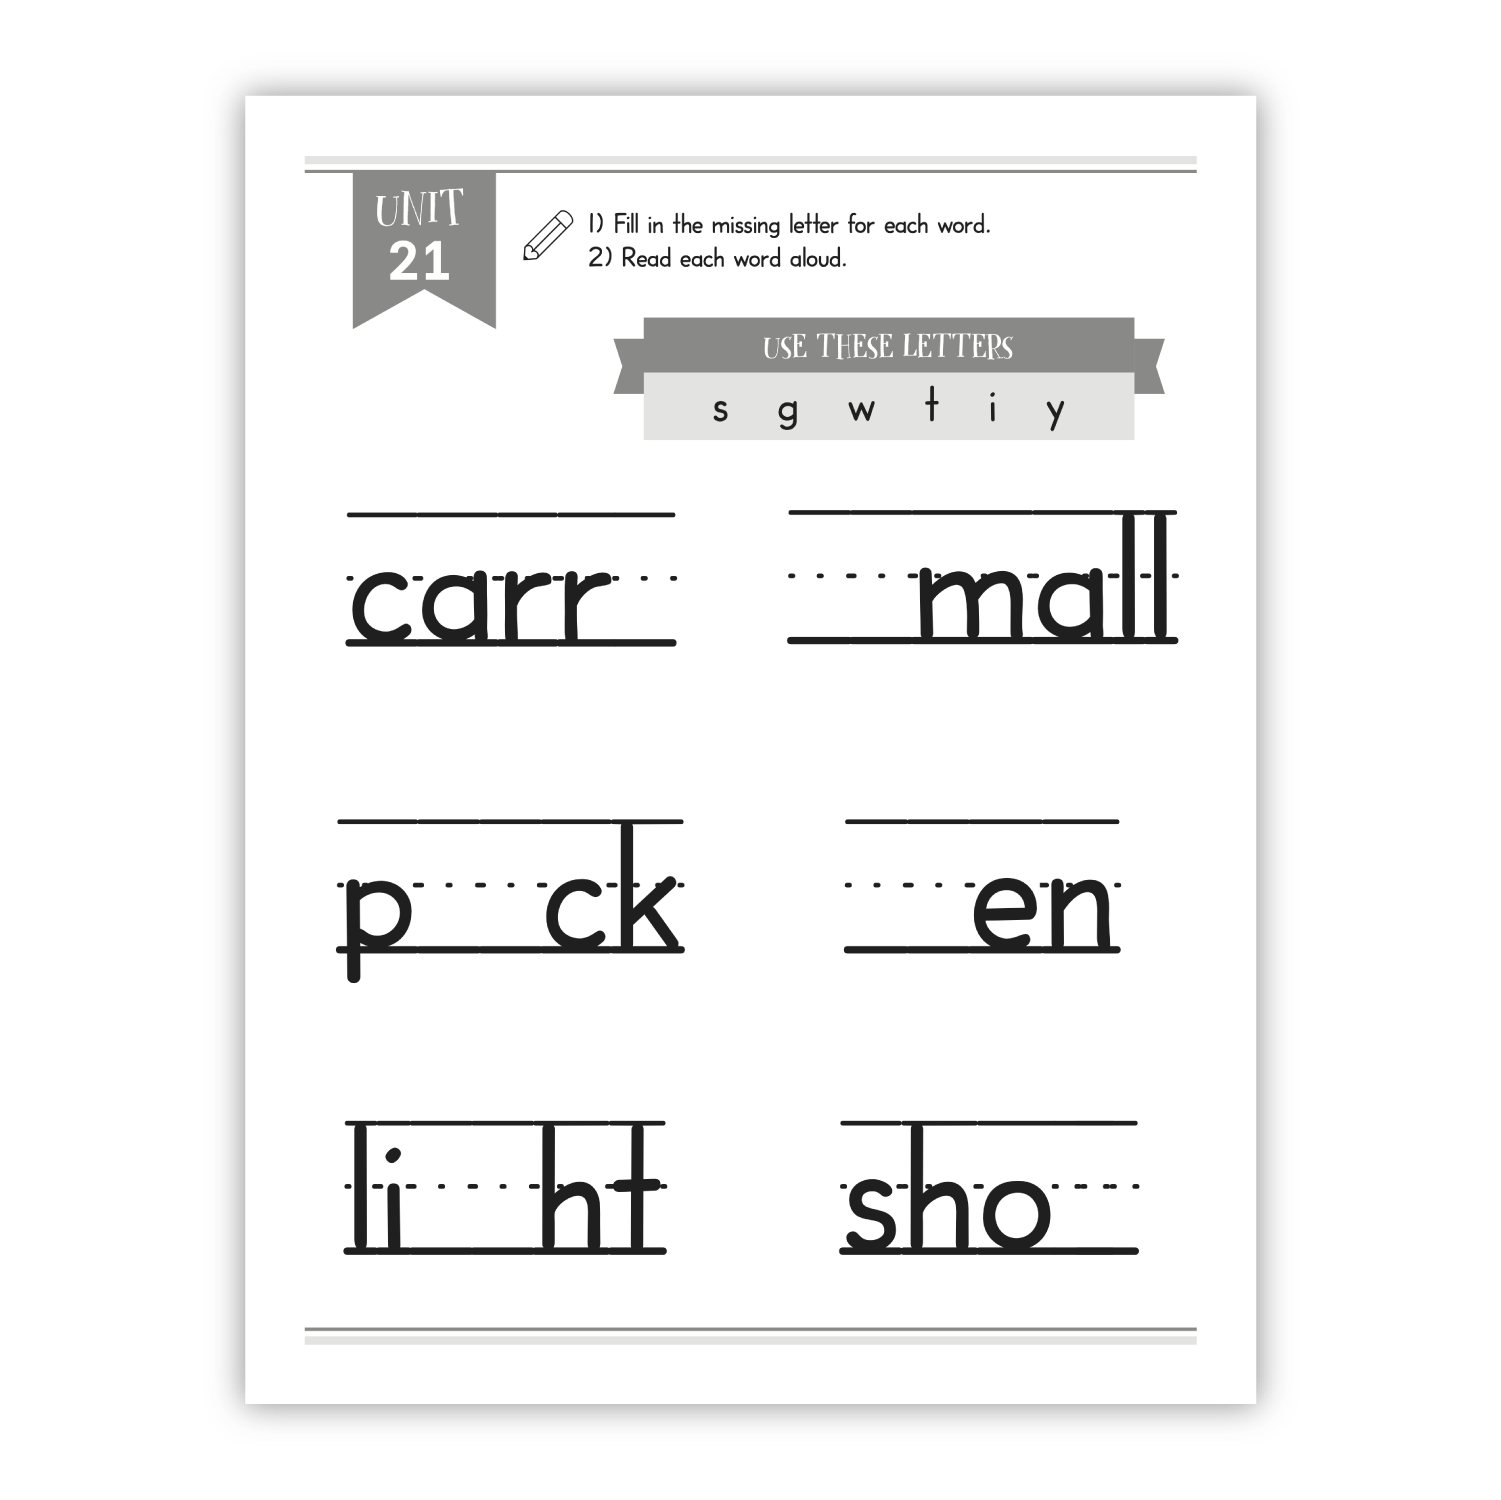 PPP Sight Words Book Mockups-07.png